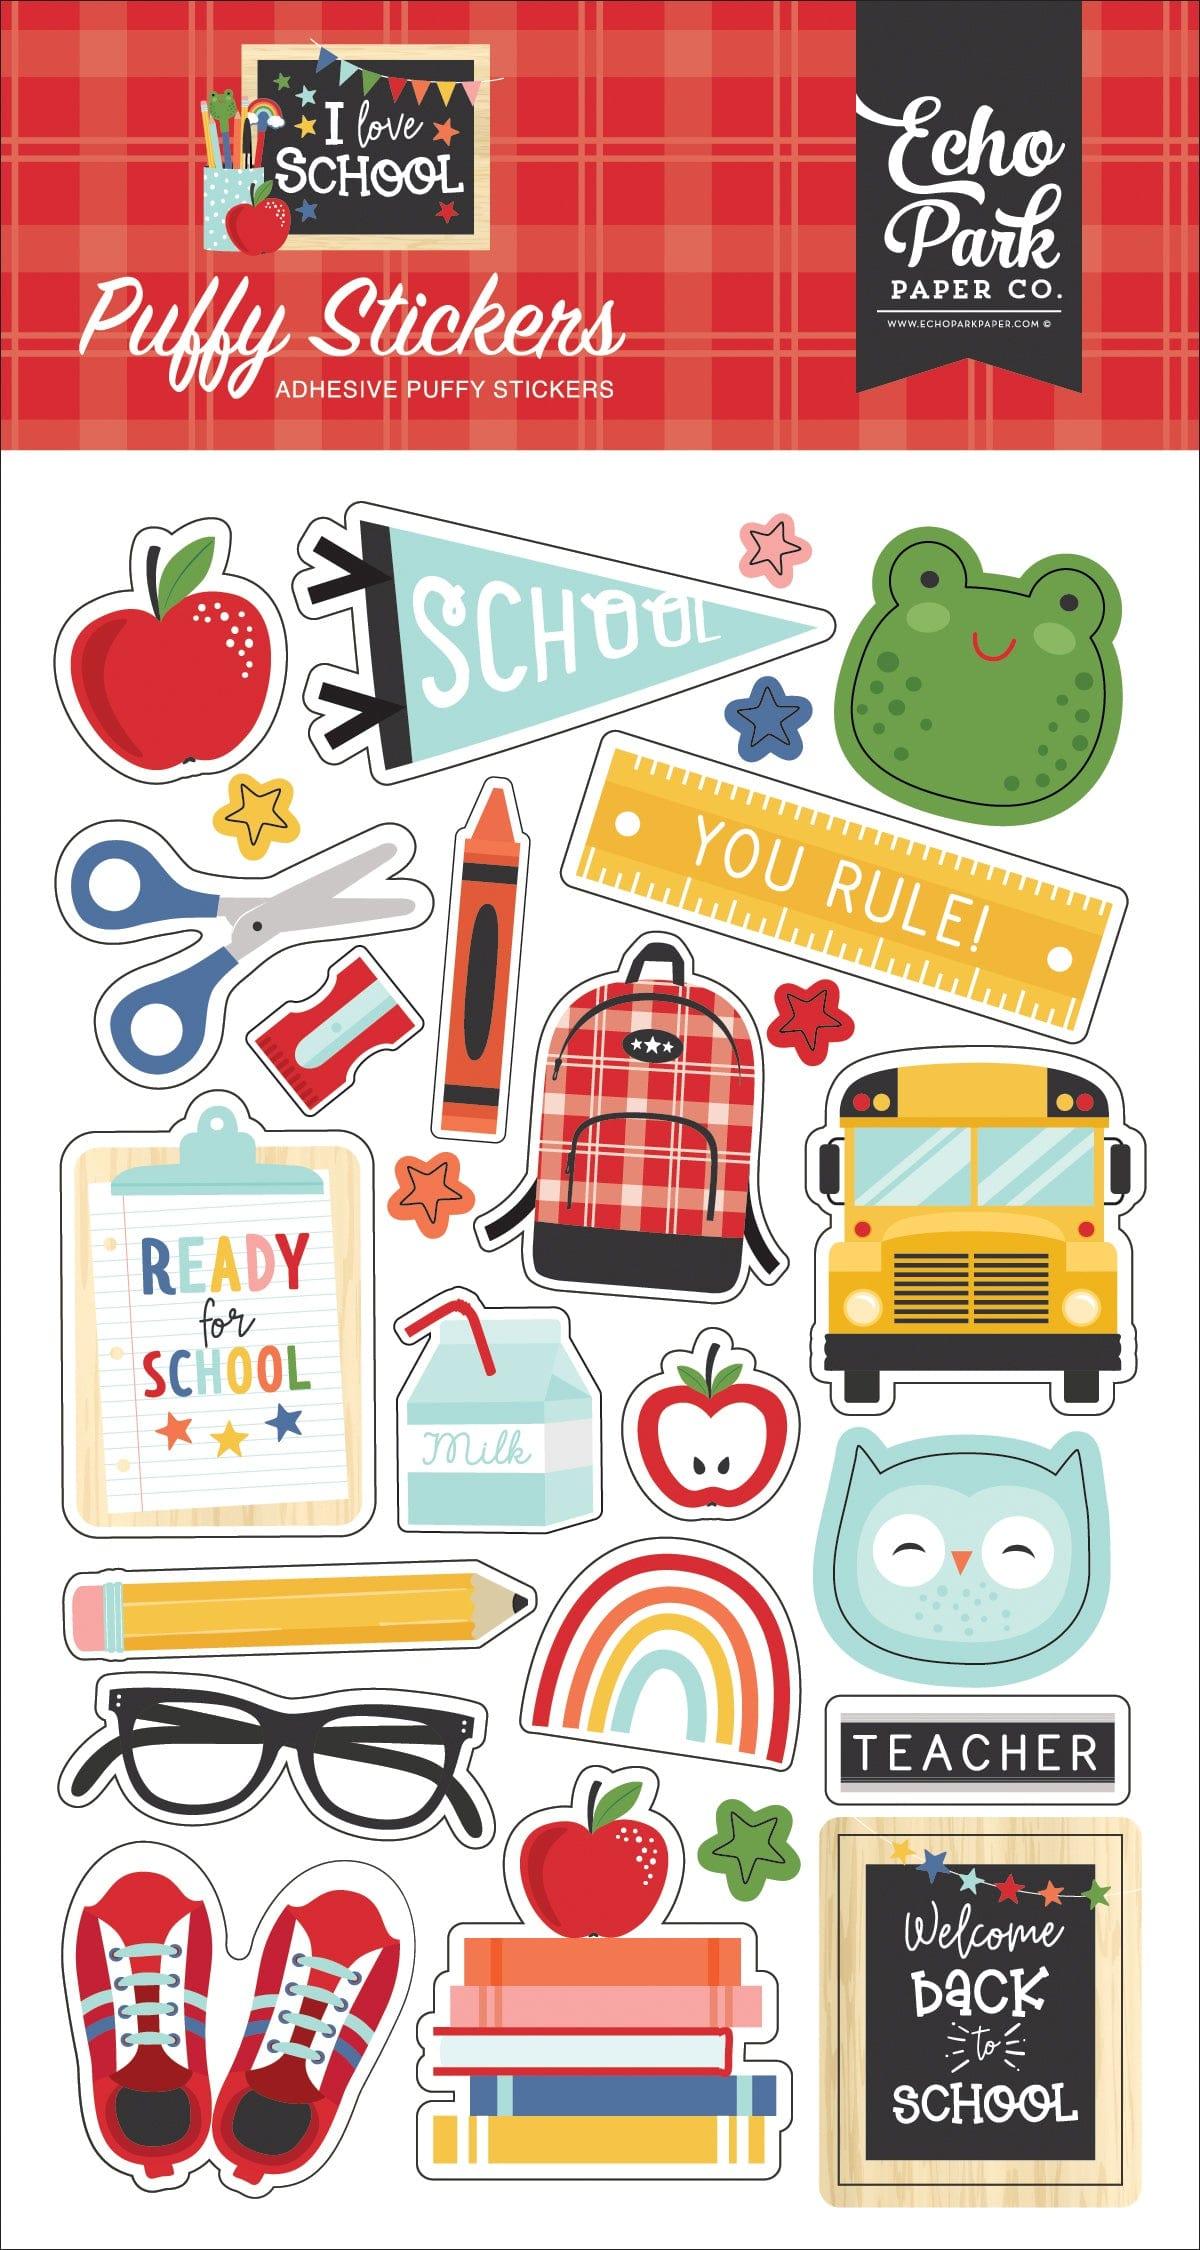 I Love School Collection 4 x 7 Puffy Stickers Scrapbook Embellishments by Echo Park Paper - Scrapbook Supply Companies